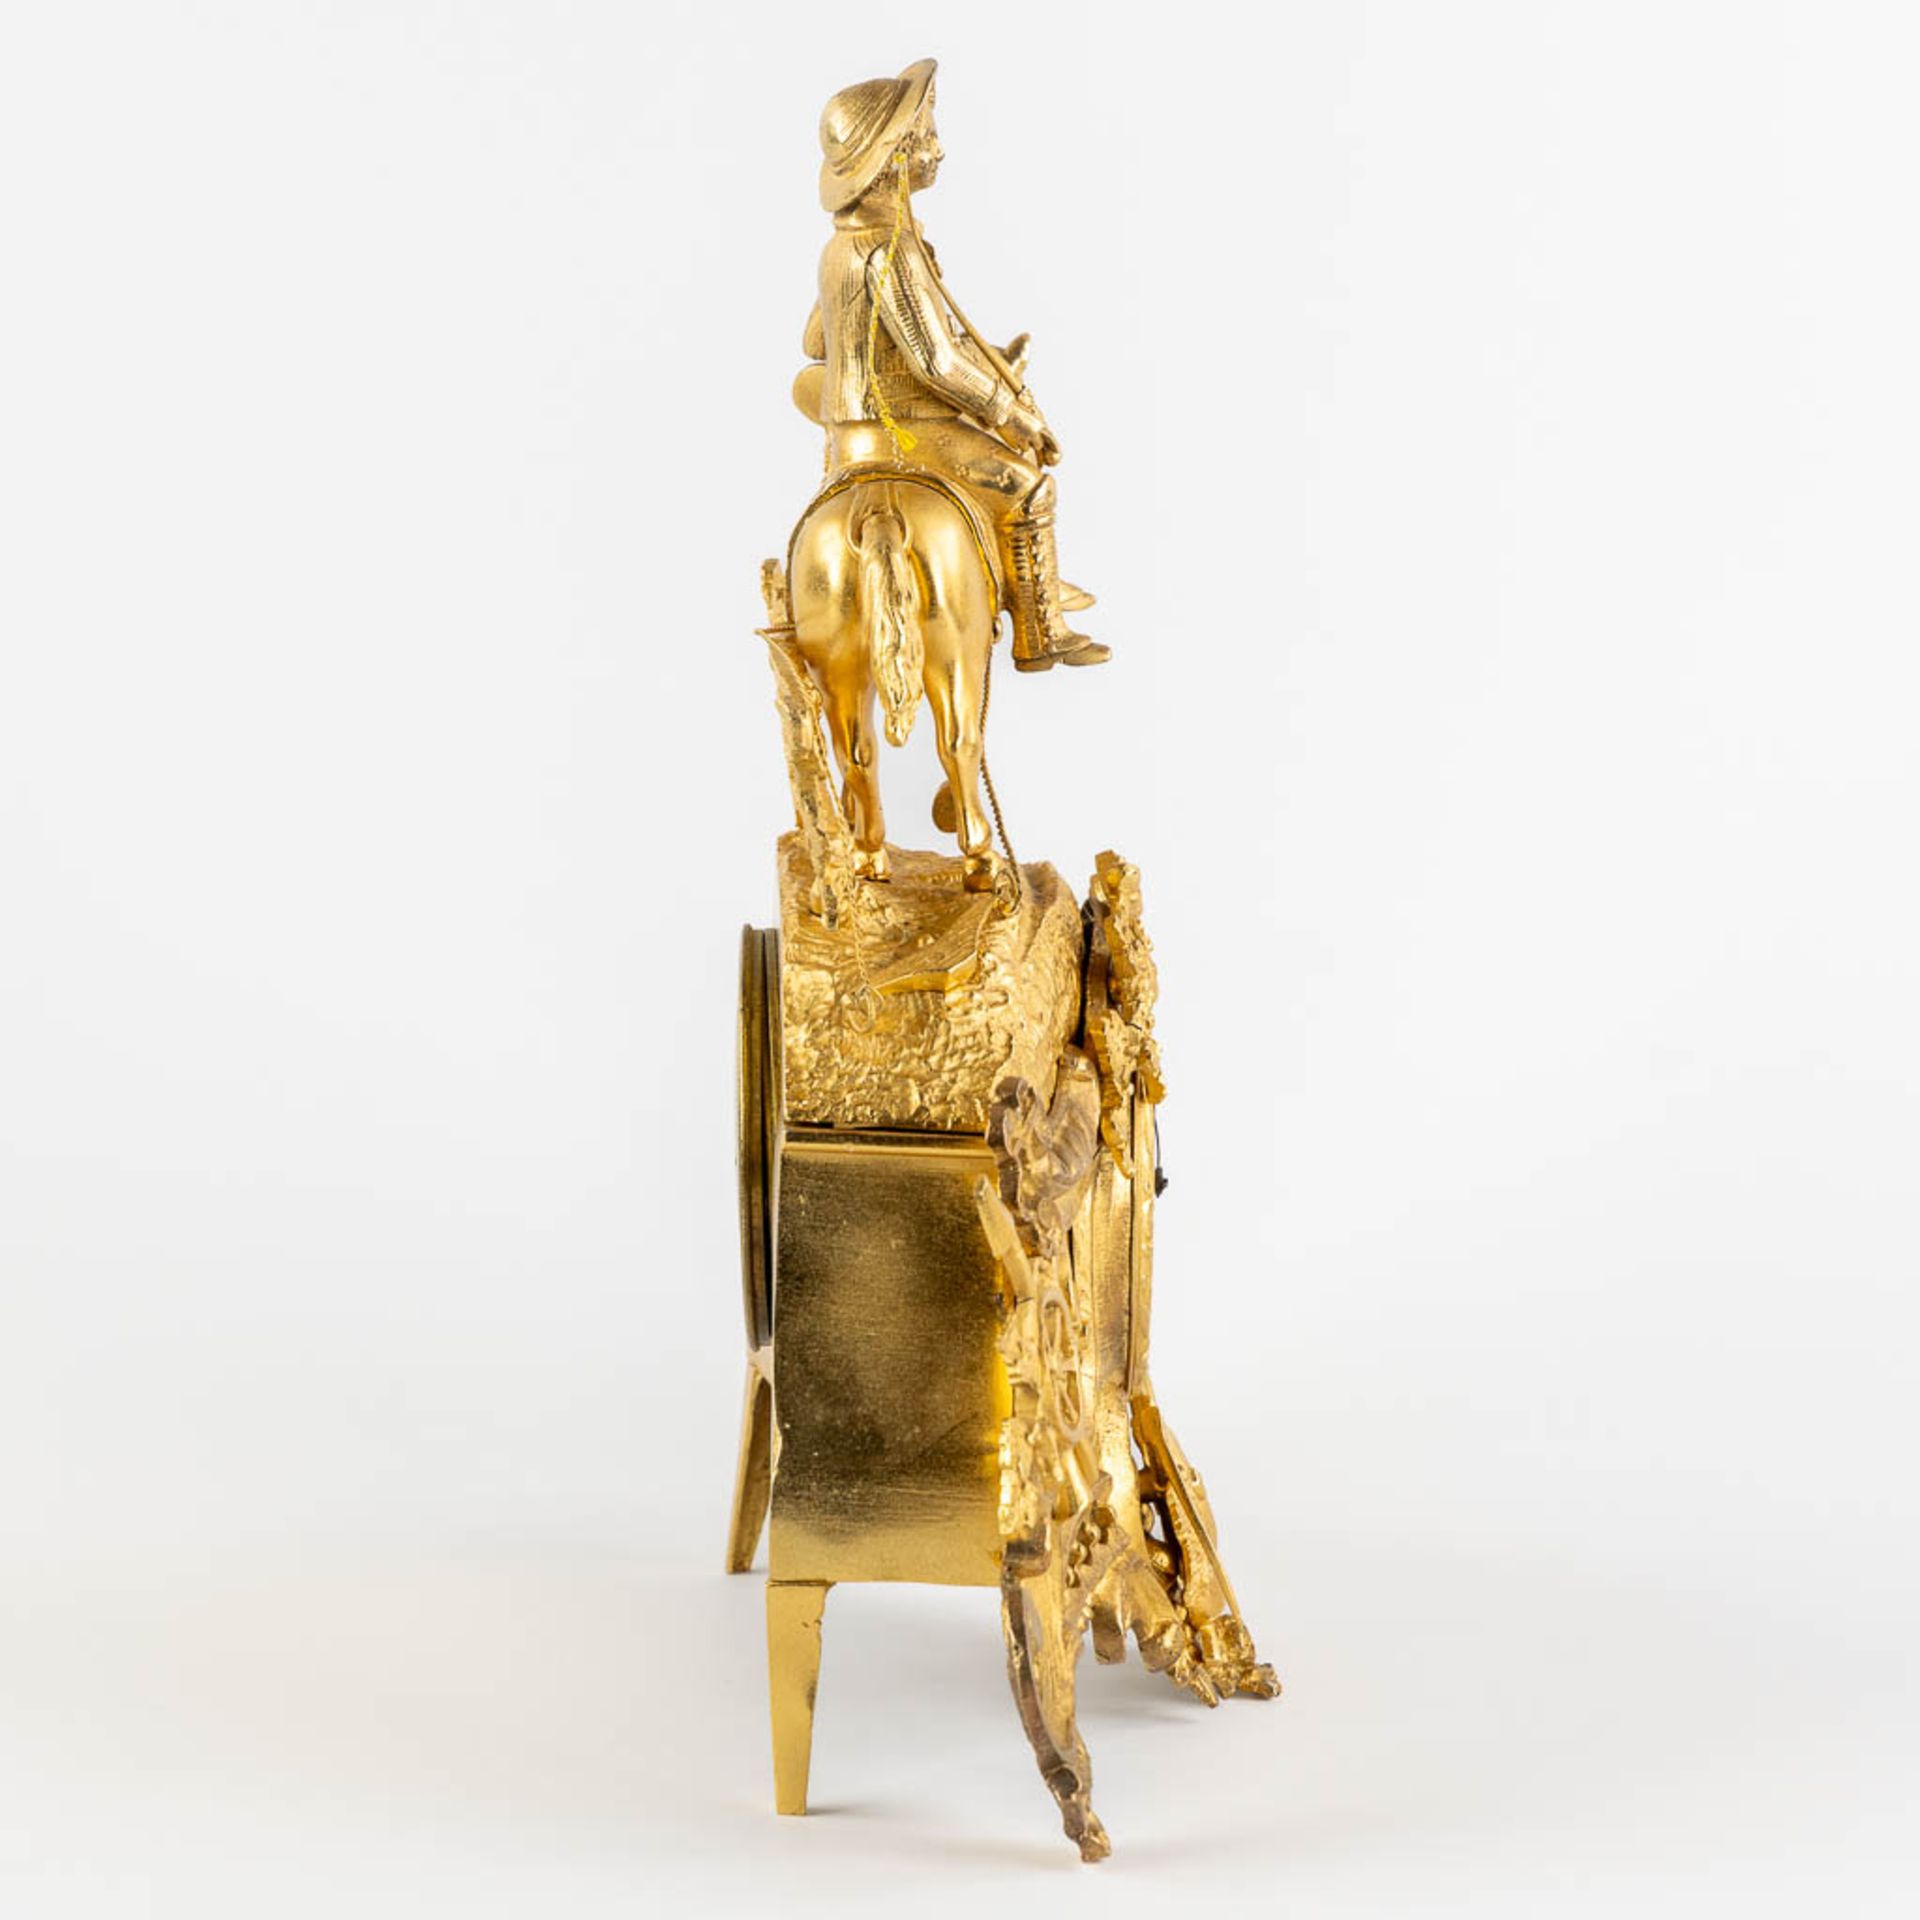 A mantle clock with a 'Horse Rider', gilt bronze. France, 19th C. (L:11,5 x W:38 x H:37 cm) - Image 7 of 12